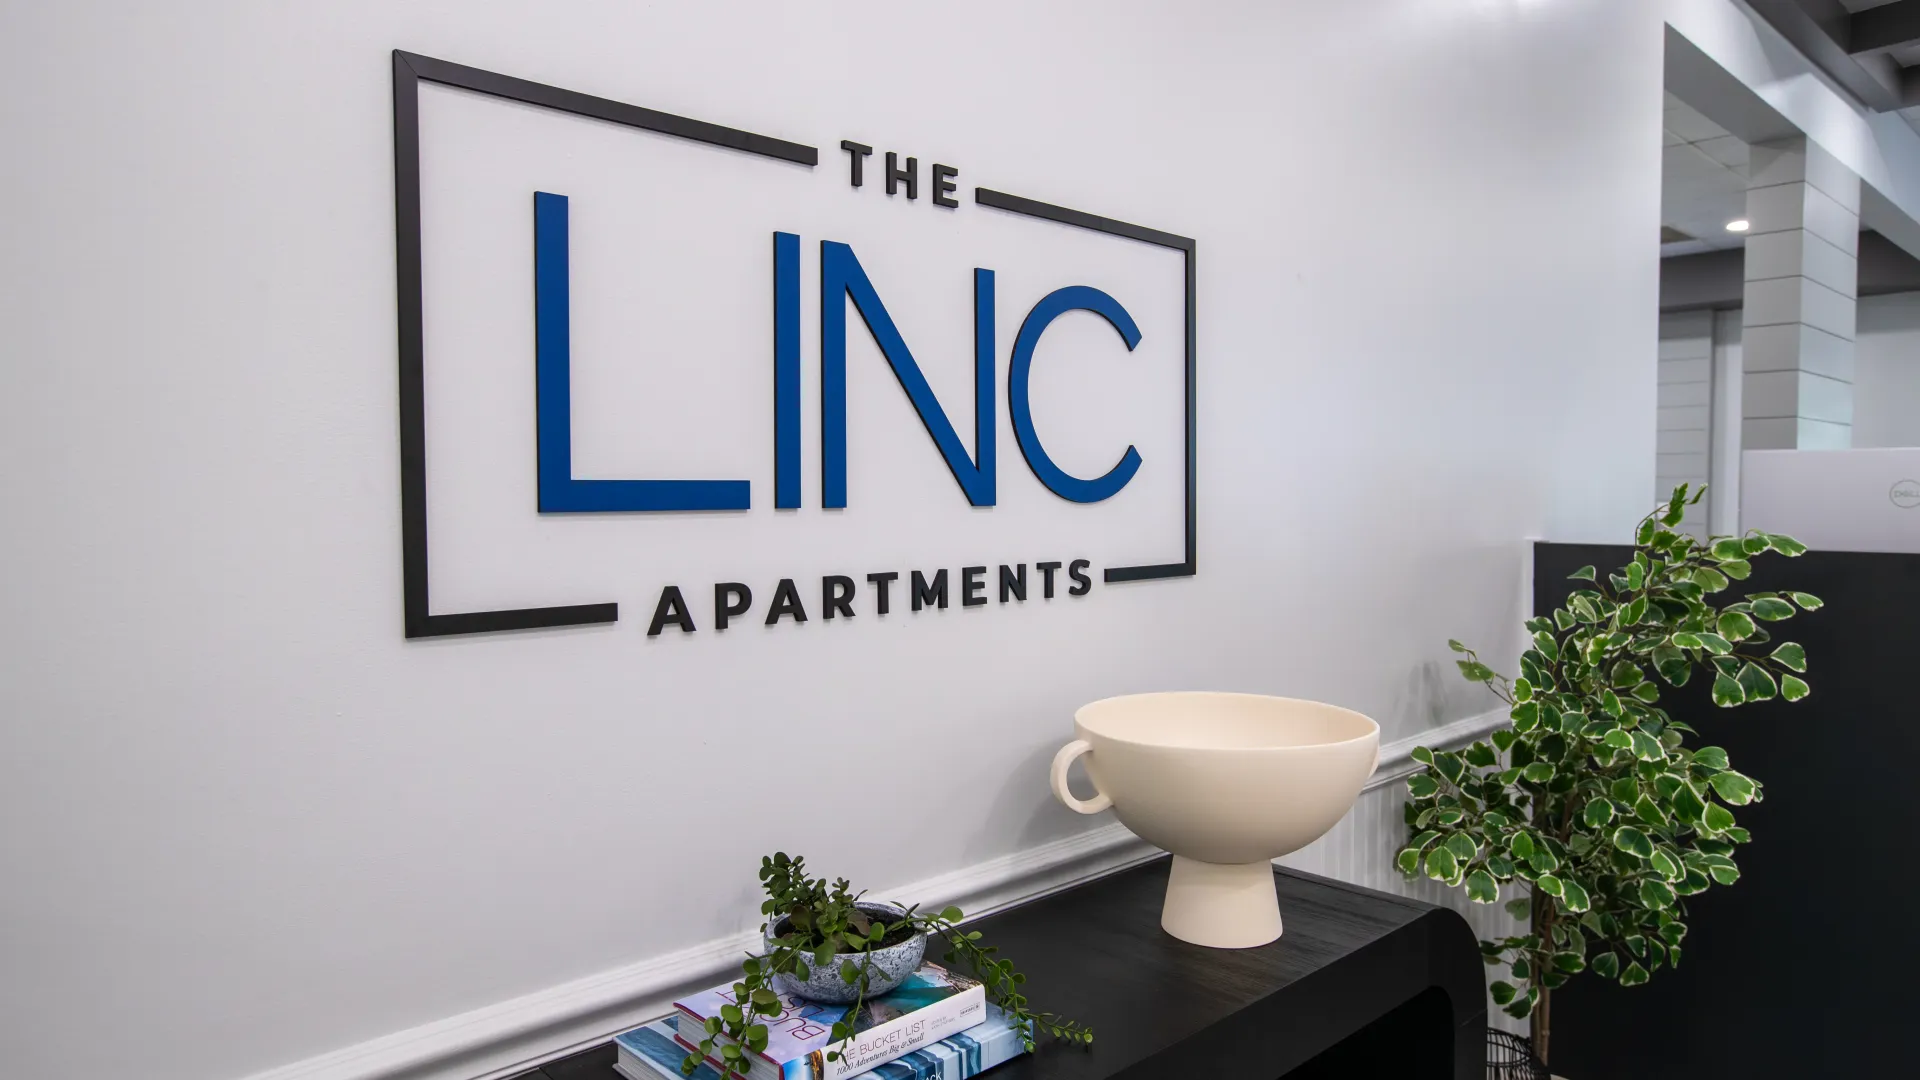 Close-up view of The LINC Apartments sign in the leasing office, featuring modern decor and a welcoming atmosphere.